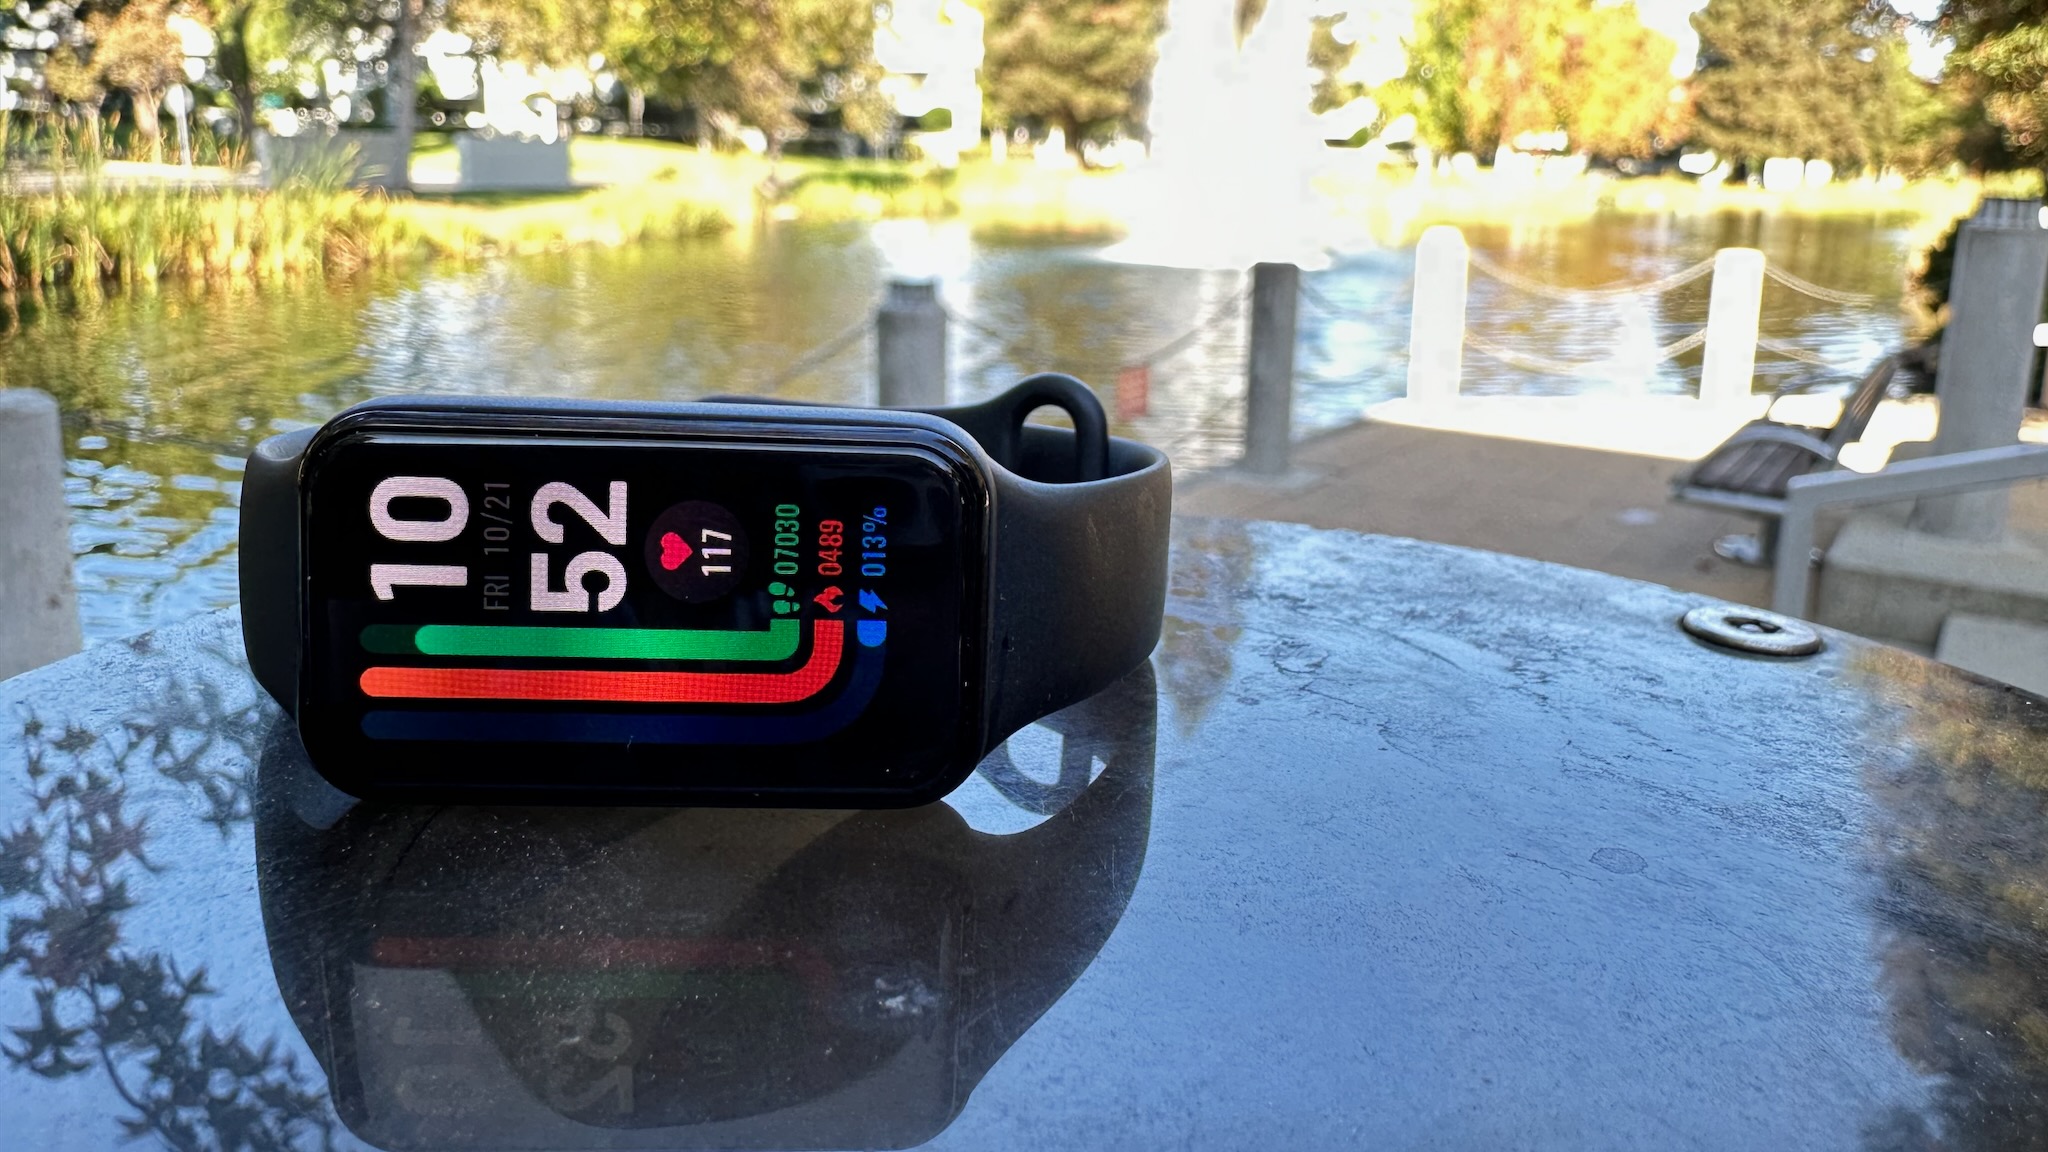 Amazfit Band 5 Review - The Fitness Tracker You've Been Waiting For 